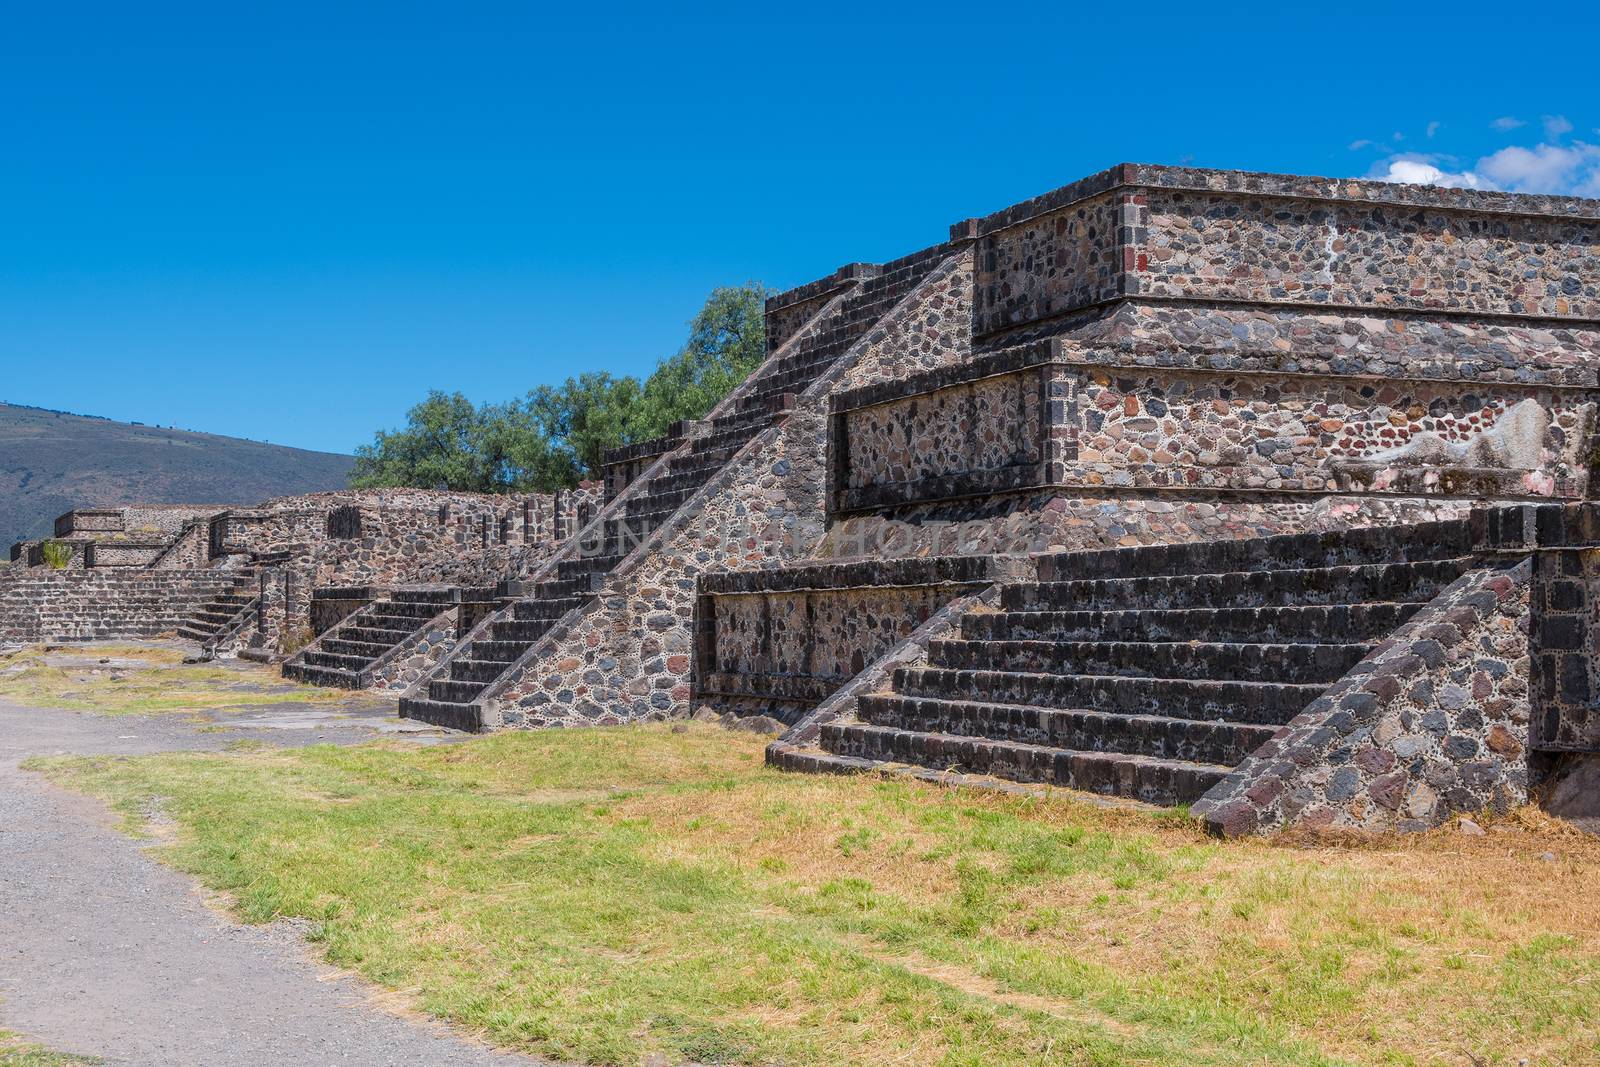 Small Pyramids at the Avenue of the Dead, in Teotihuacan, Mexico.